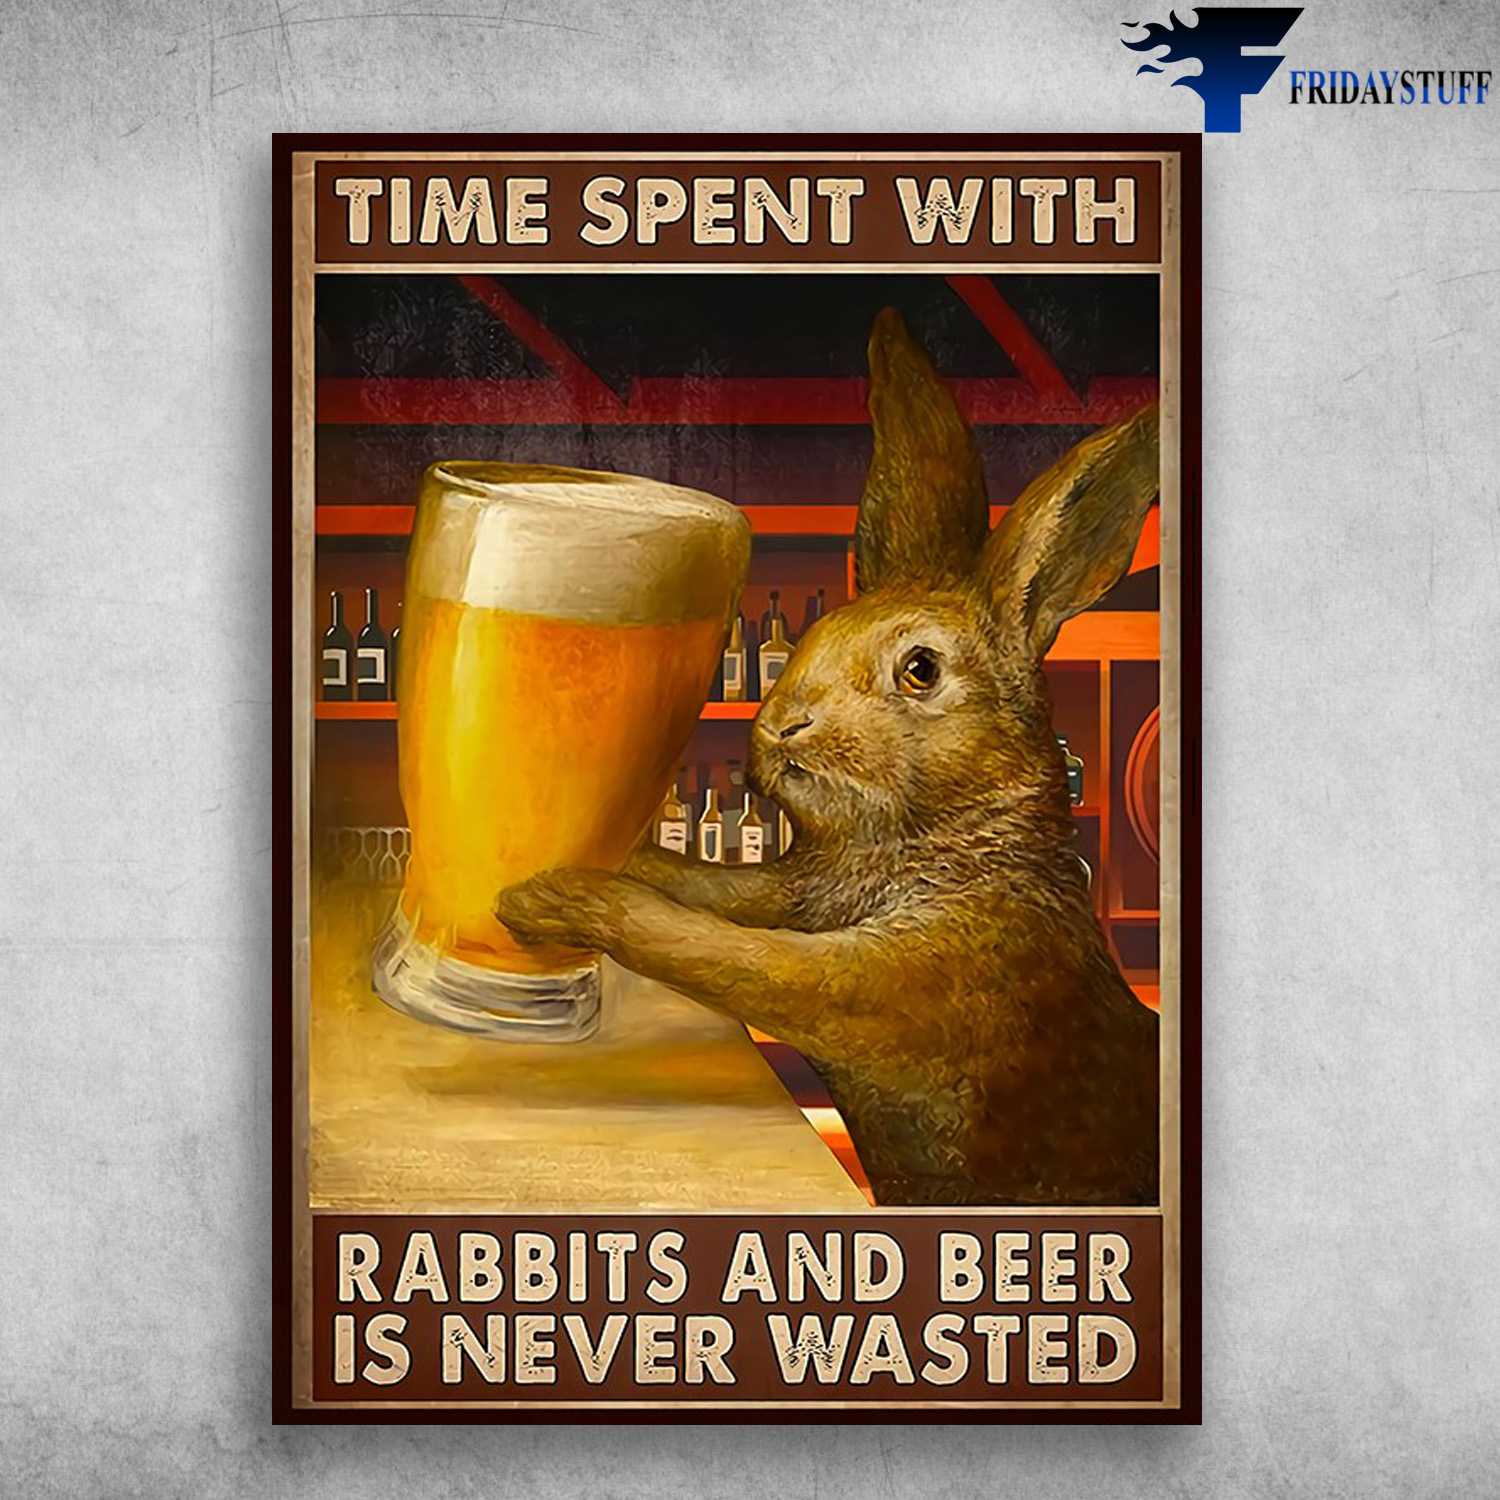 Rabbit Drink Beer, Bunny Beer - Time Spent With, Rabbits And Beer, Is Never Wasted